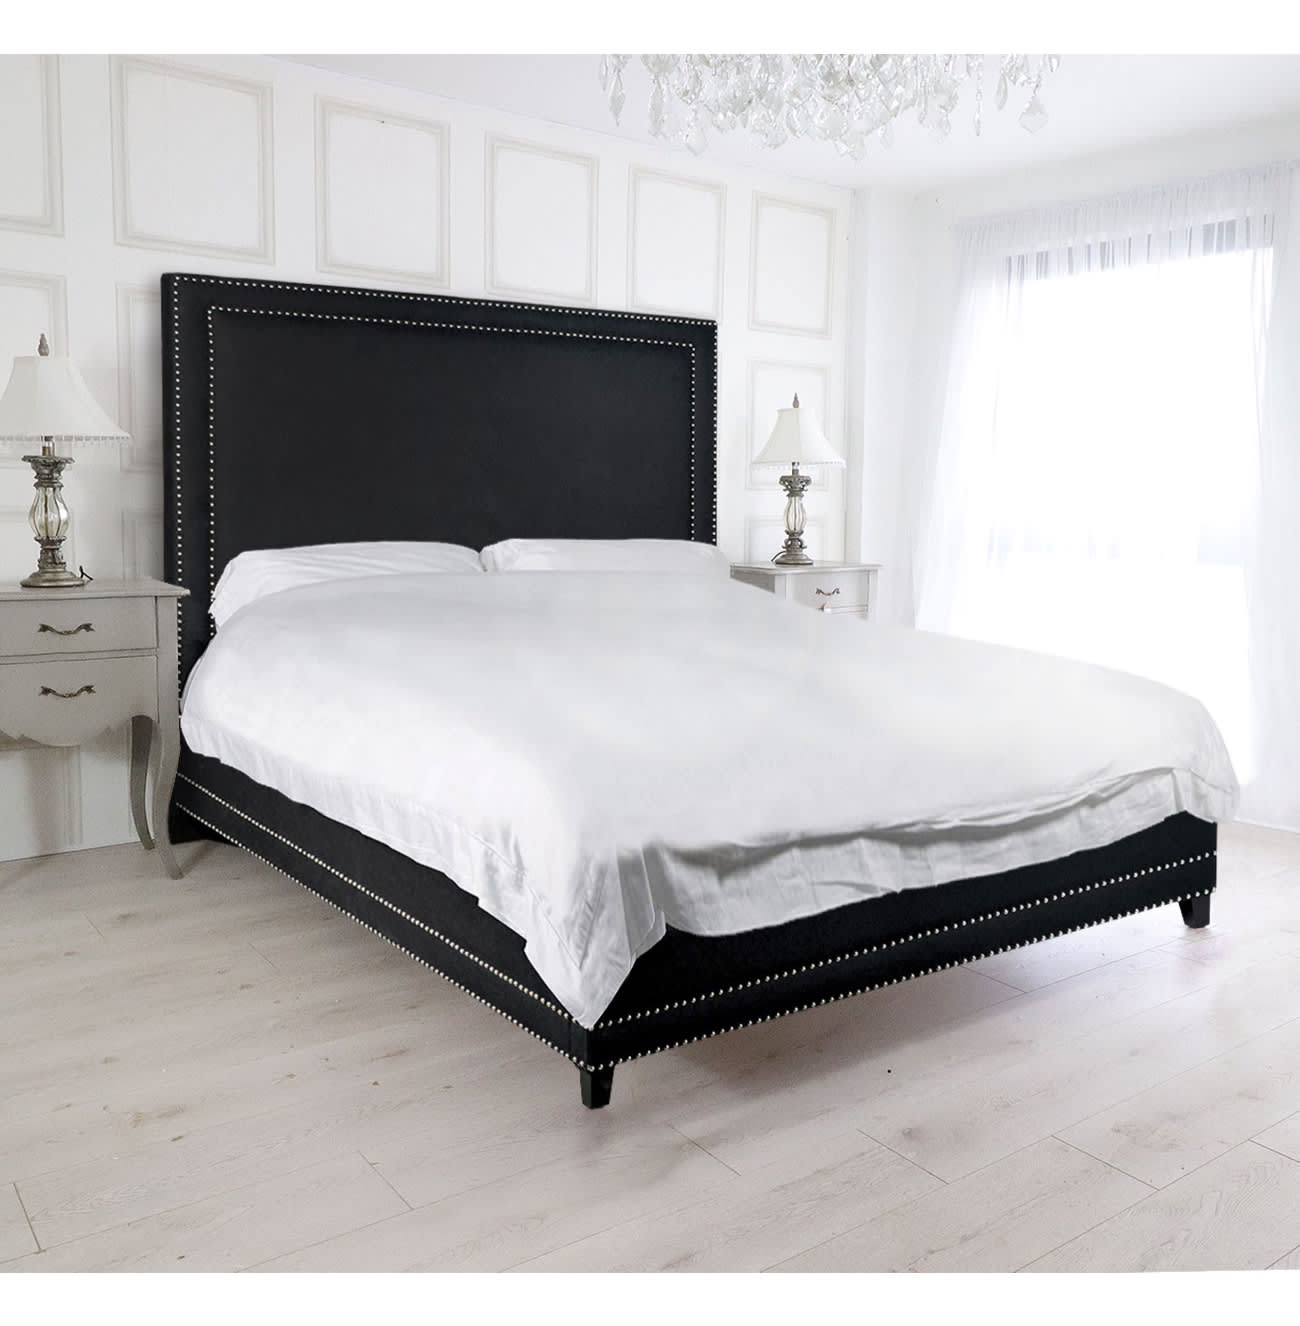 Black Kingsize Bed with Studs